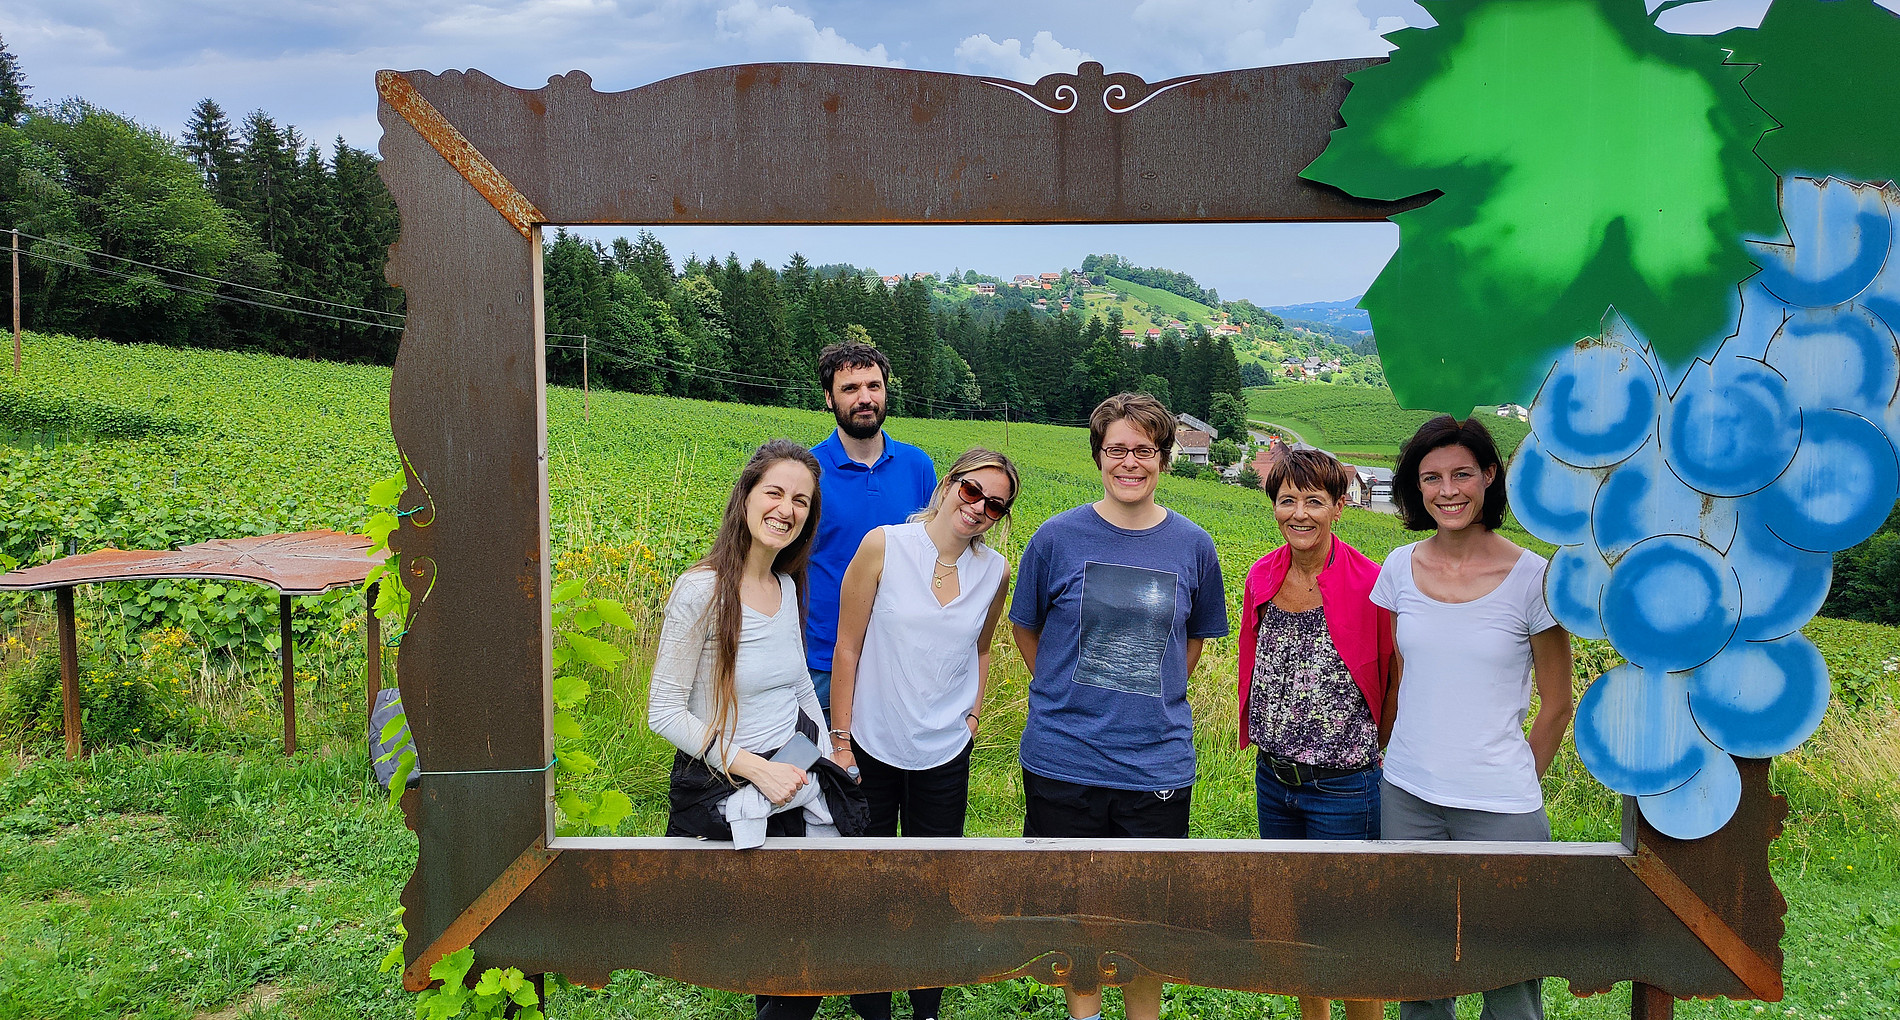 Employees and guests of Developmental Psychology on a joint excursion in the countryside ©Viktoria Jöbstl